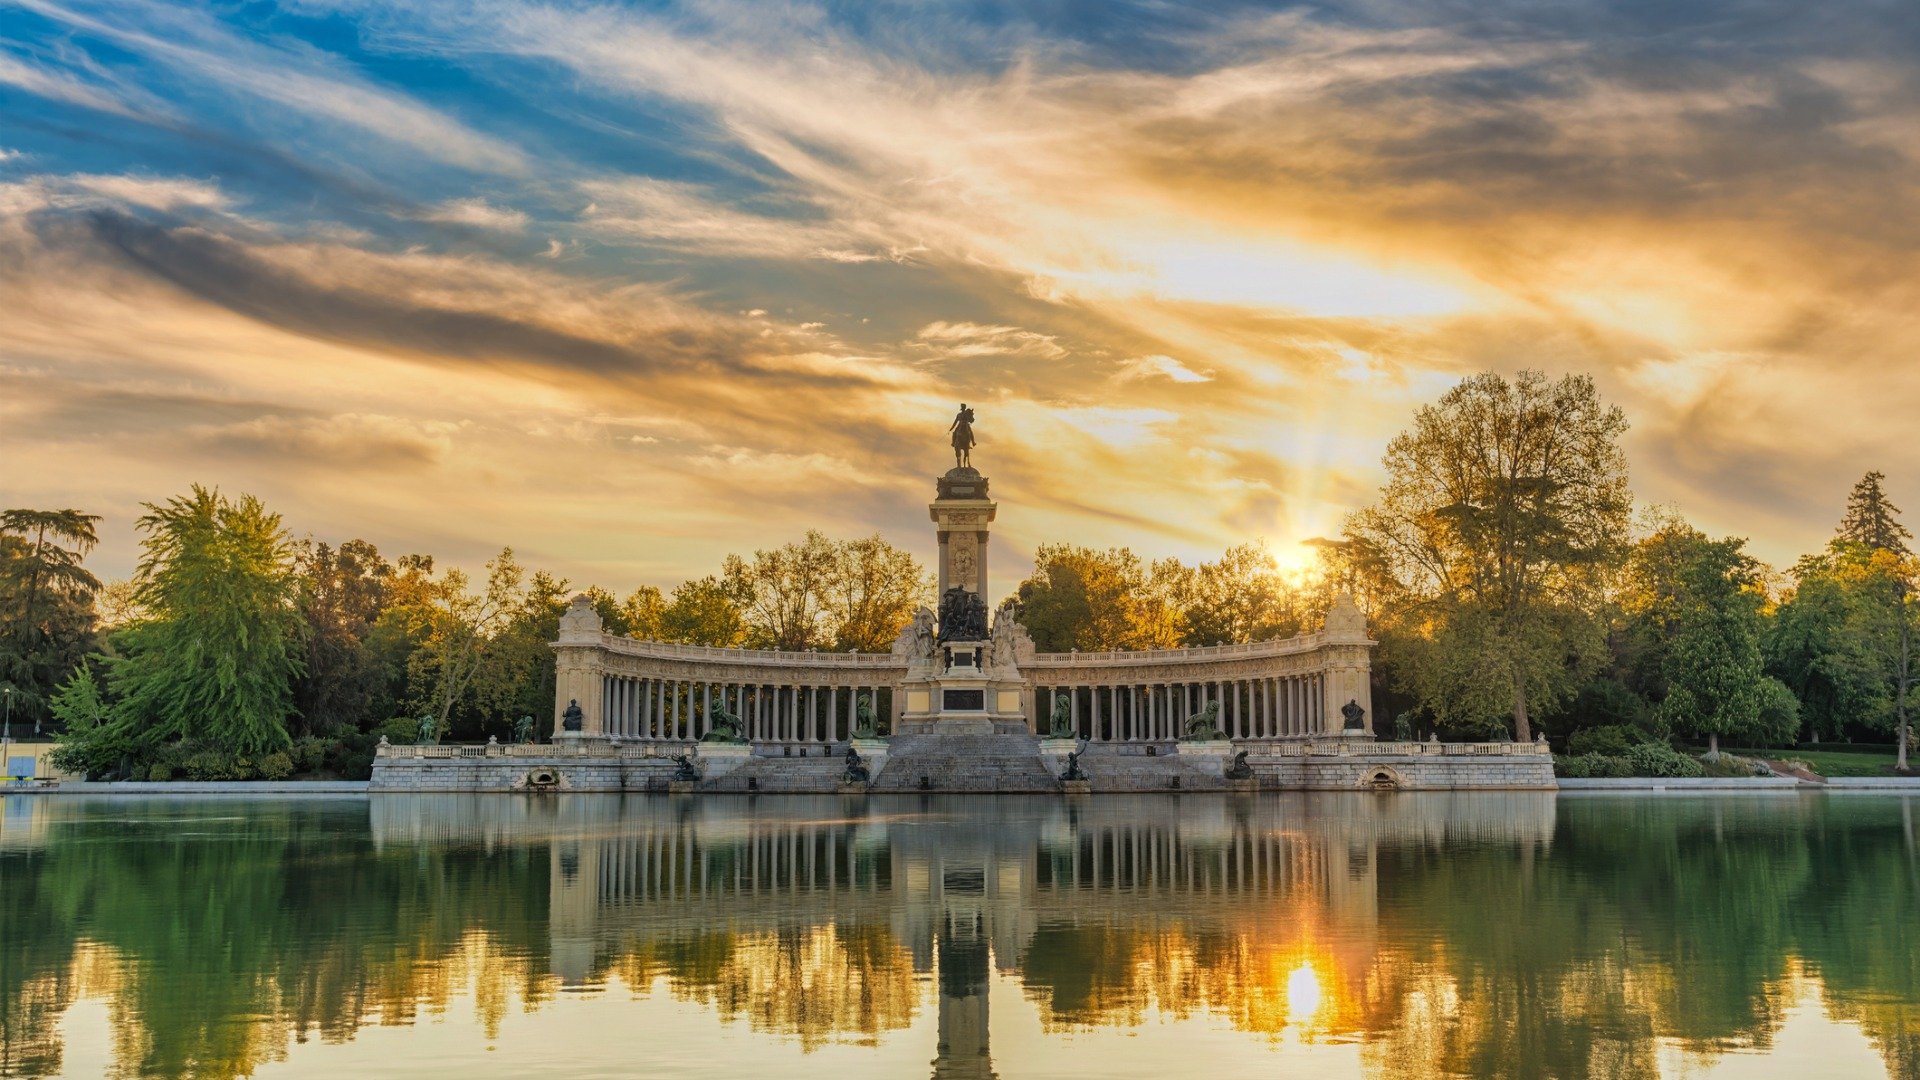 The large artificial lake of El Retiro Park at sunset. In the background, the grandiose Monument to Alfonso XII. 